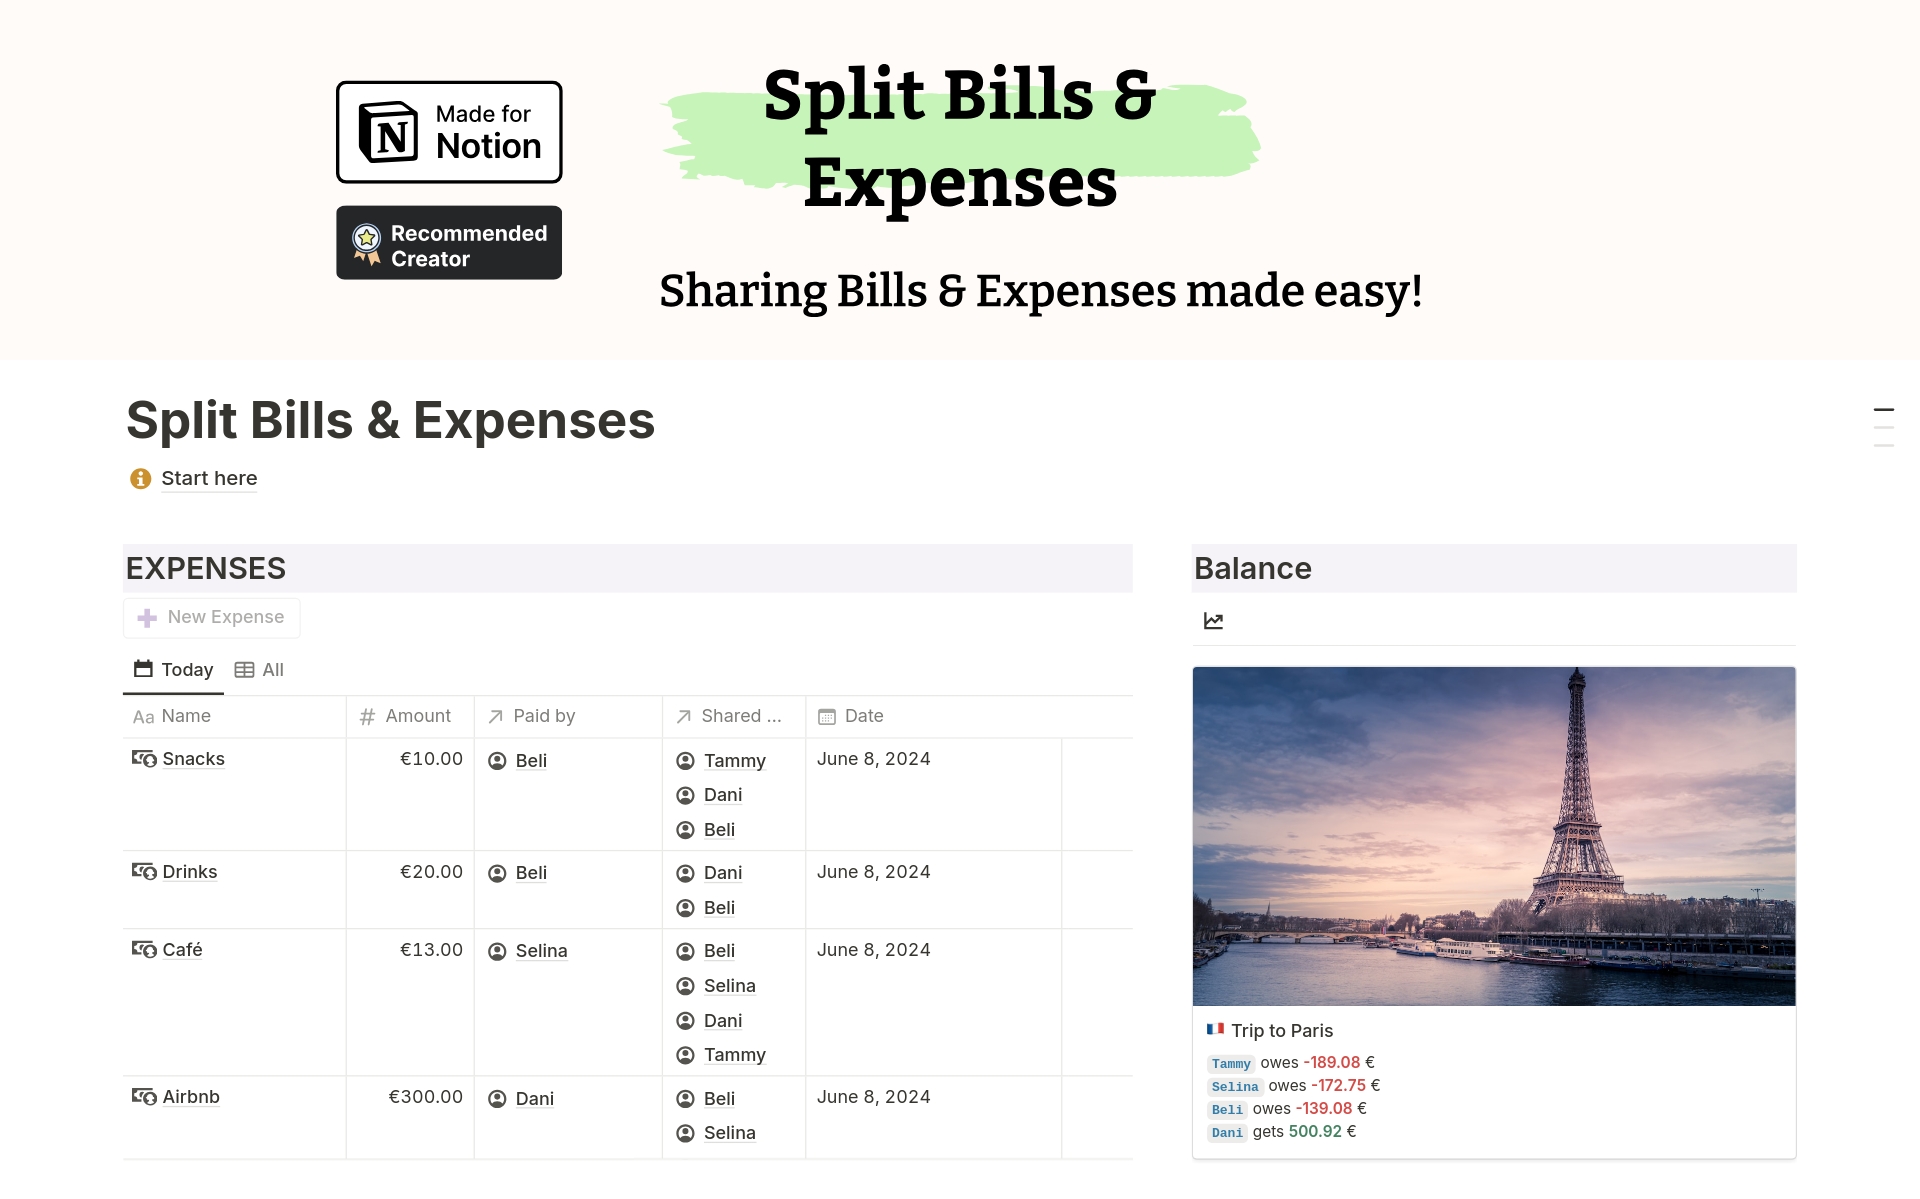 Sharing expenses made easy!

Forget about lost bills and disagreements over billing. Keep track of shared expenses with roommates, friends or trips.